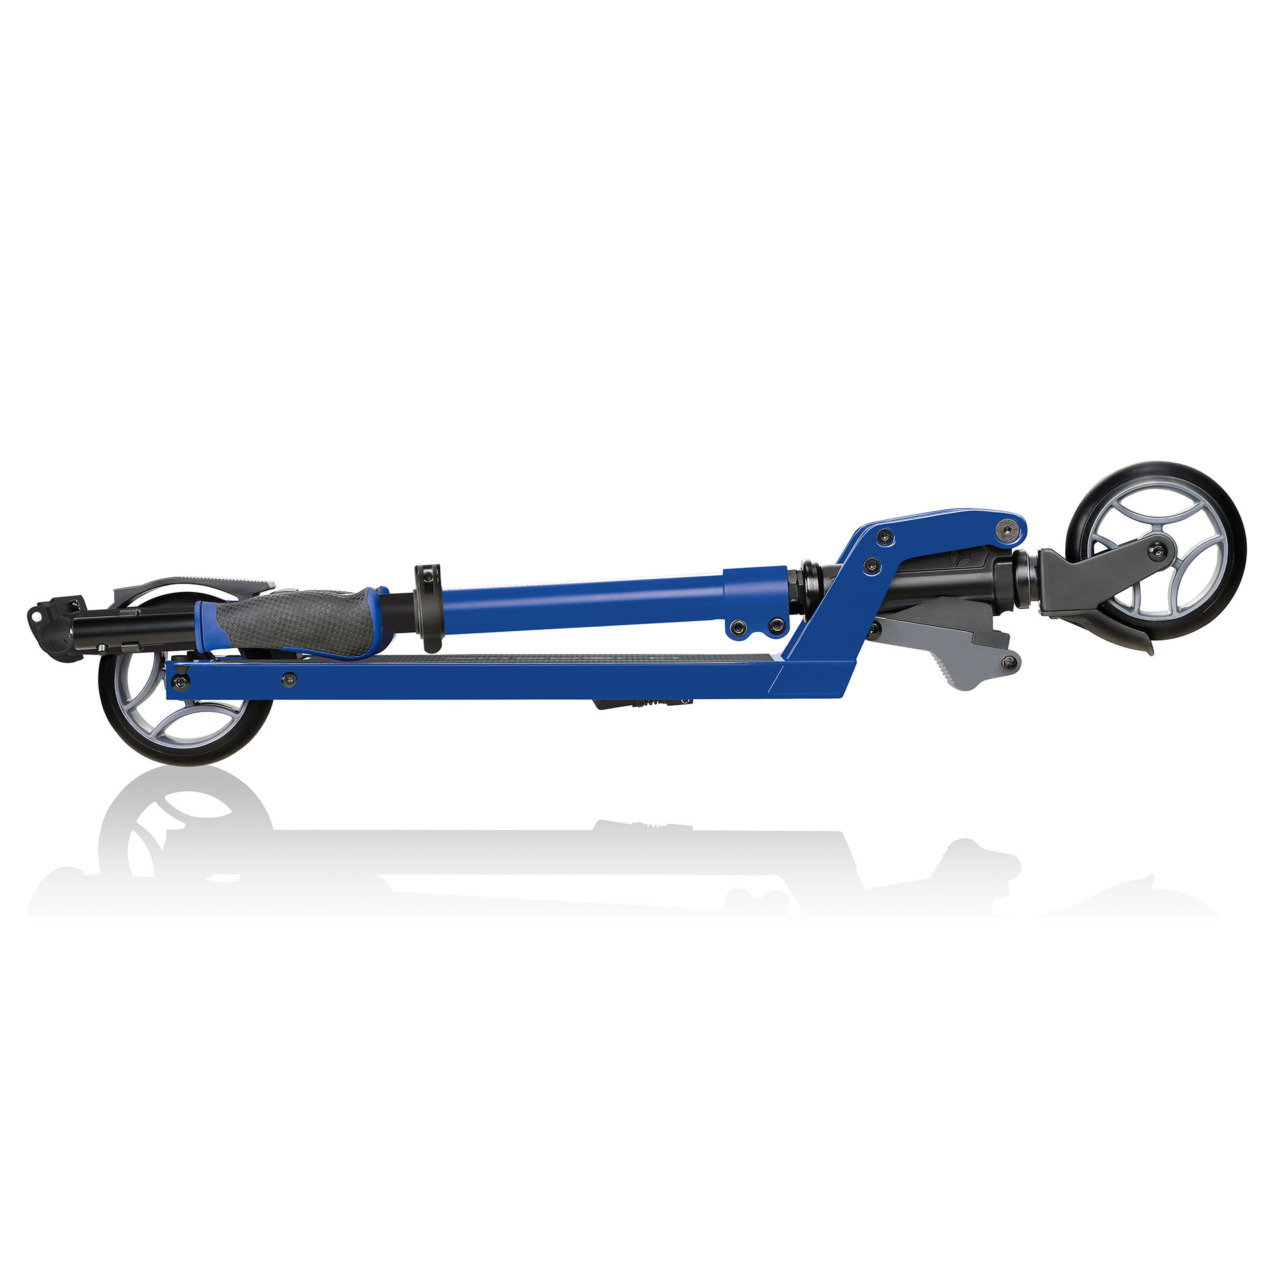 670 100 2 Fold Up Scooter